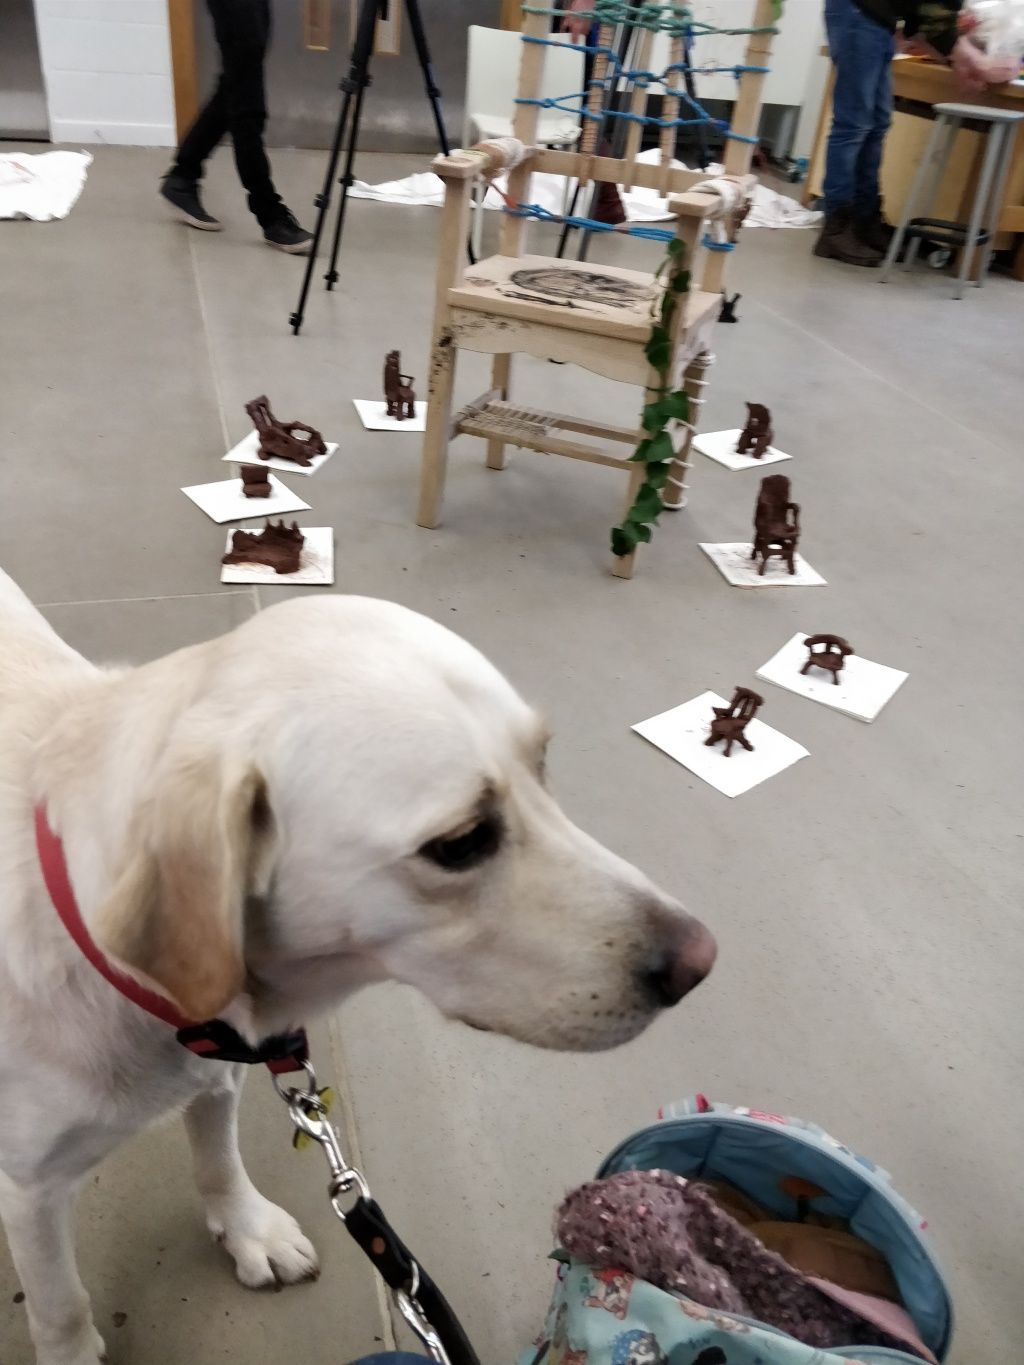 Guide Dog Uri with some hand-crafted chairs in the background